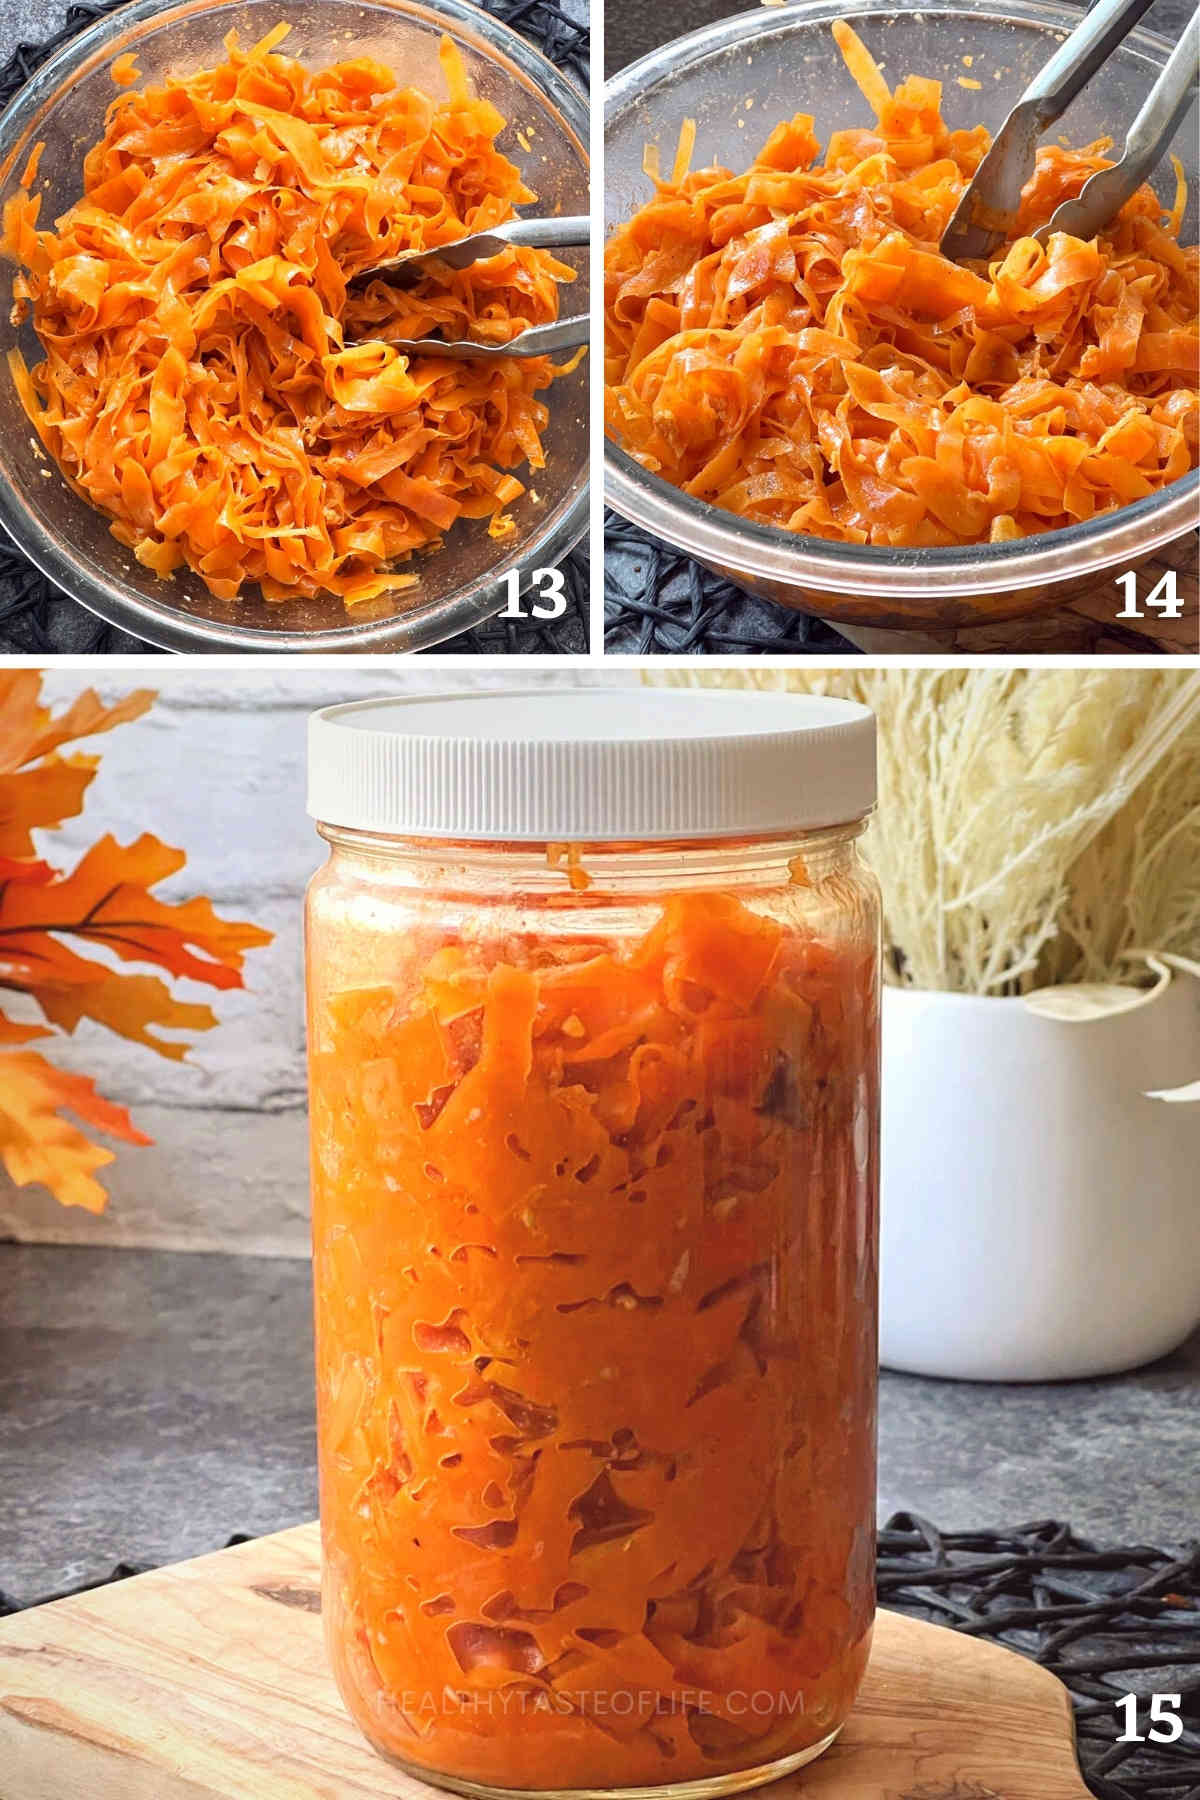 Mixing the shaved carrot salad and storing in a jar.